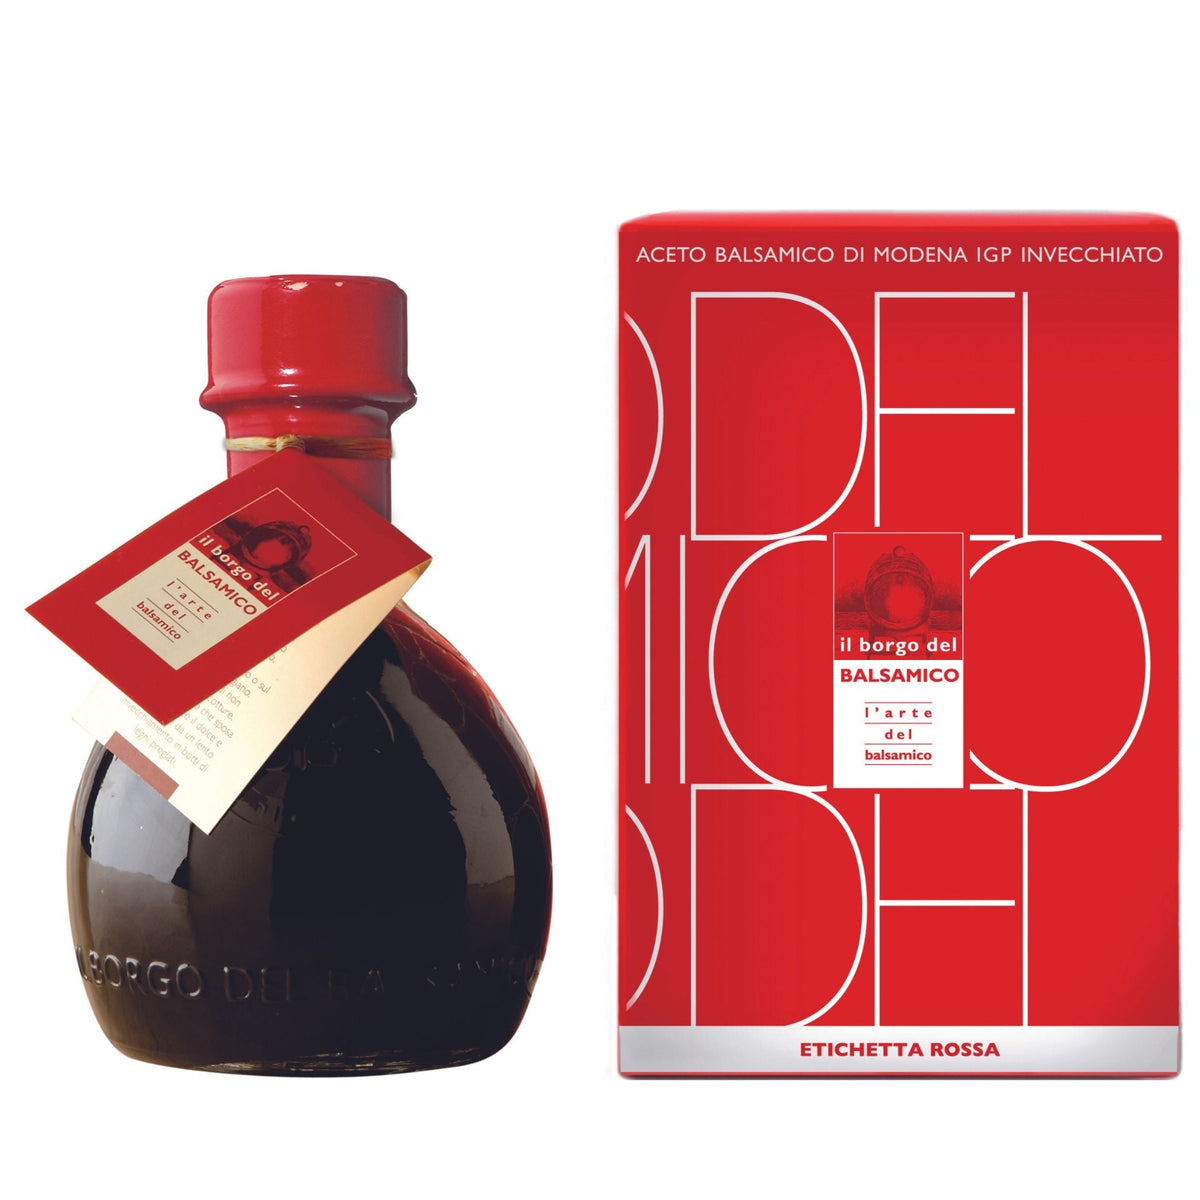 Il Borgo del Balsamico Balsamic Vinegar of Modena IGP Aged Red Label Low Acidity (Ampoule bottle with box) 250ml  | Imported and distributed in the UK by Just Gourmet Foods